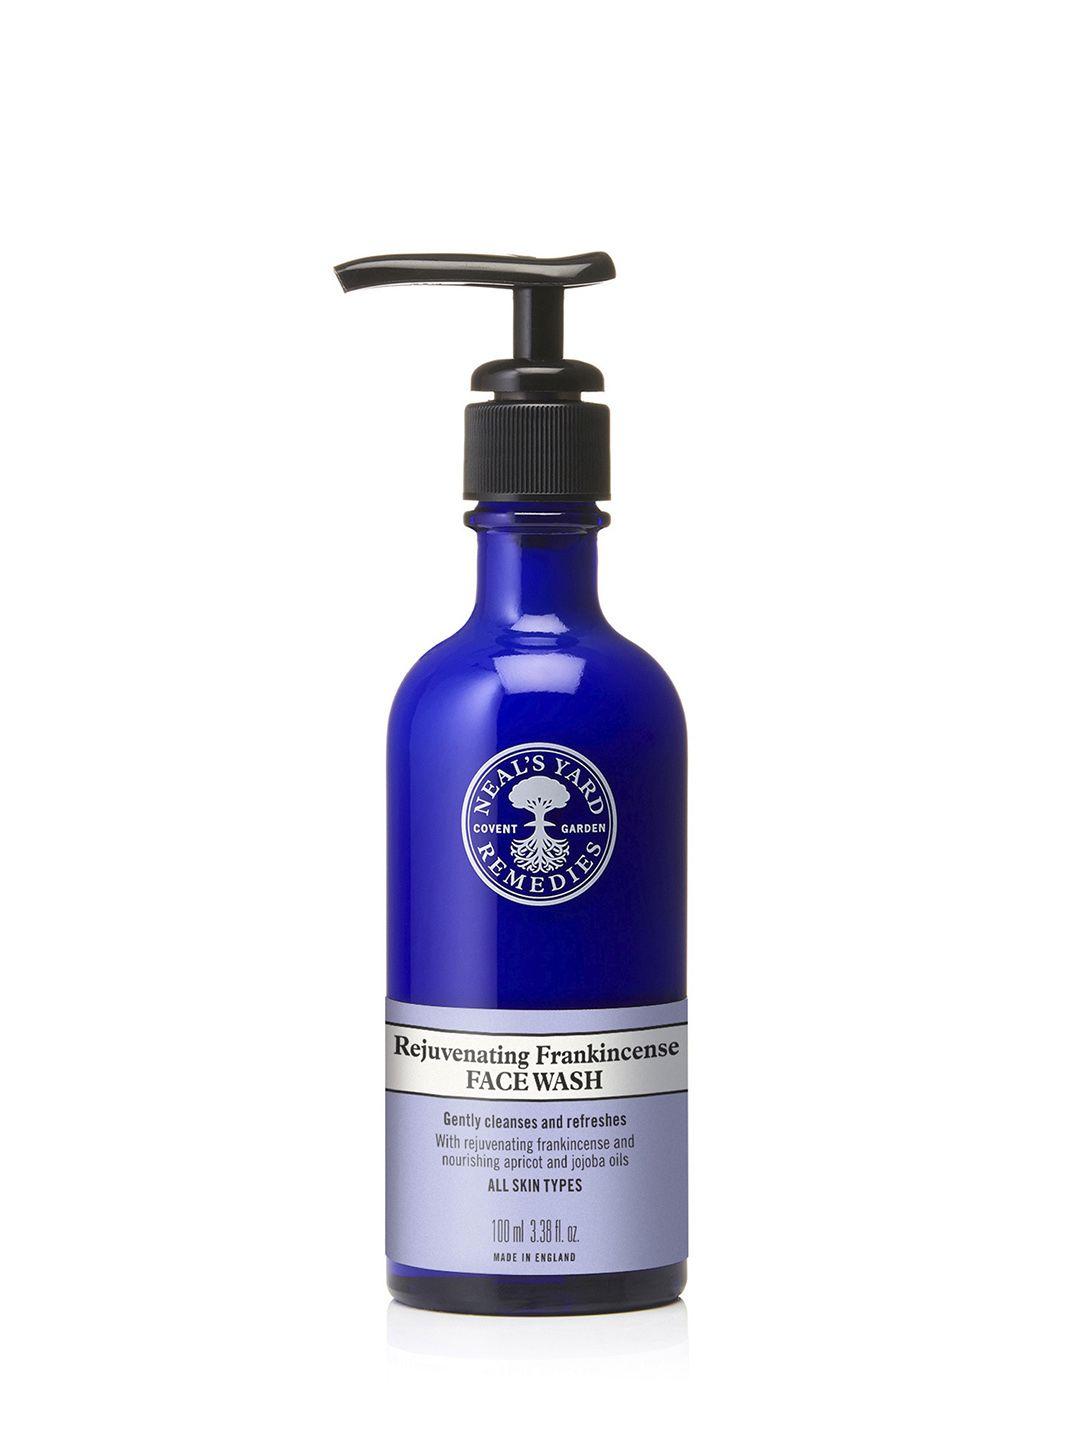 neal's yard remedies organic rejuvenating frankincense face wash for all skin types - 100ml